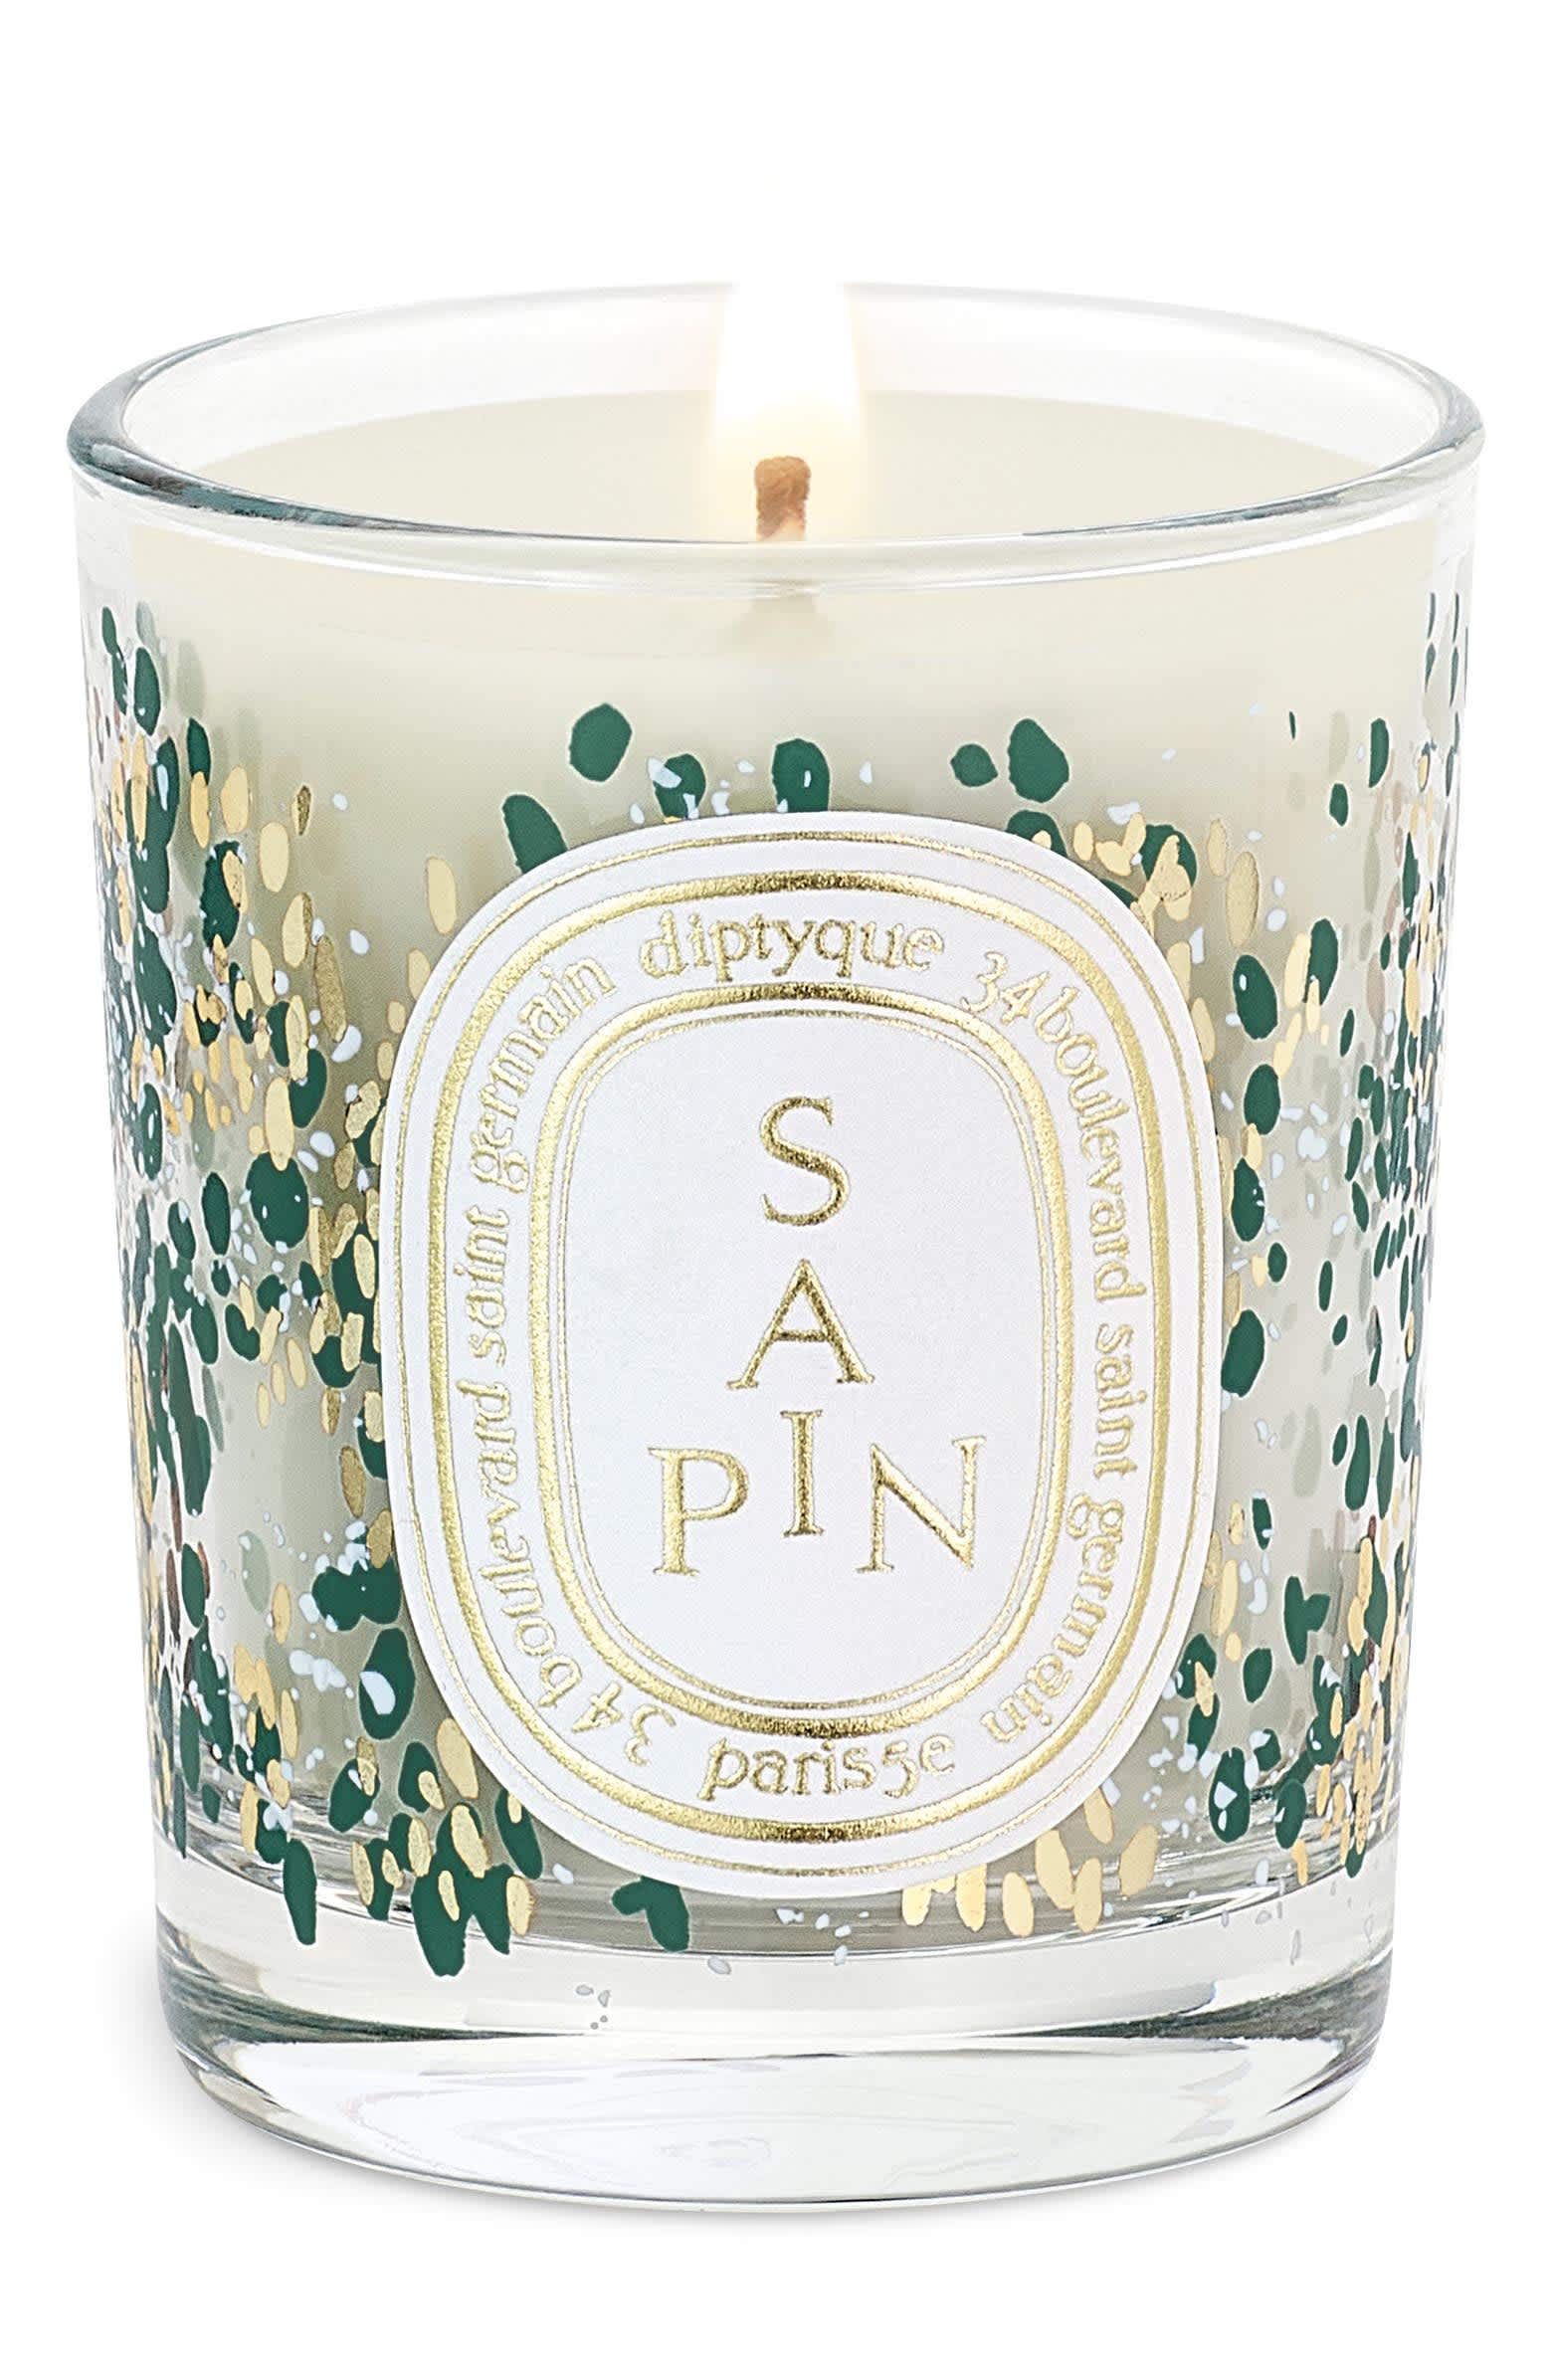 Diptyque's New Holiday Collection Is Perfect for Gifting 